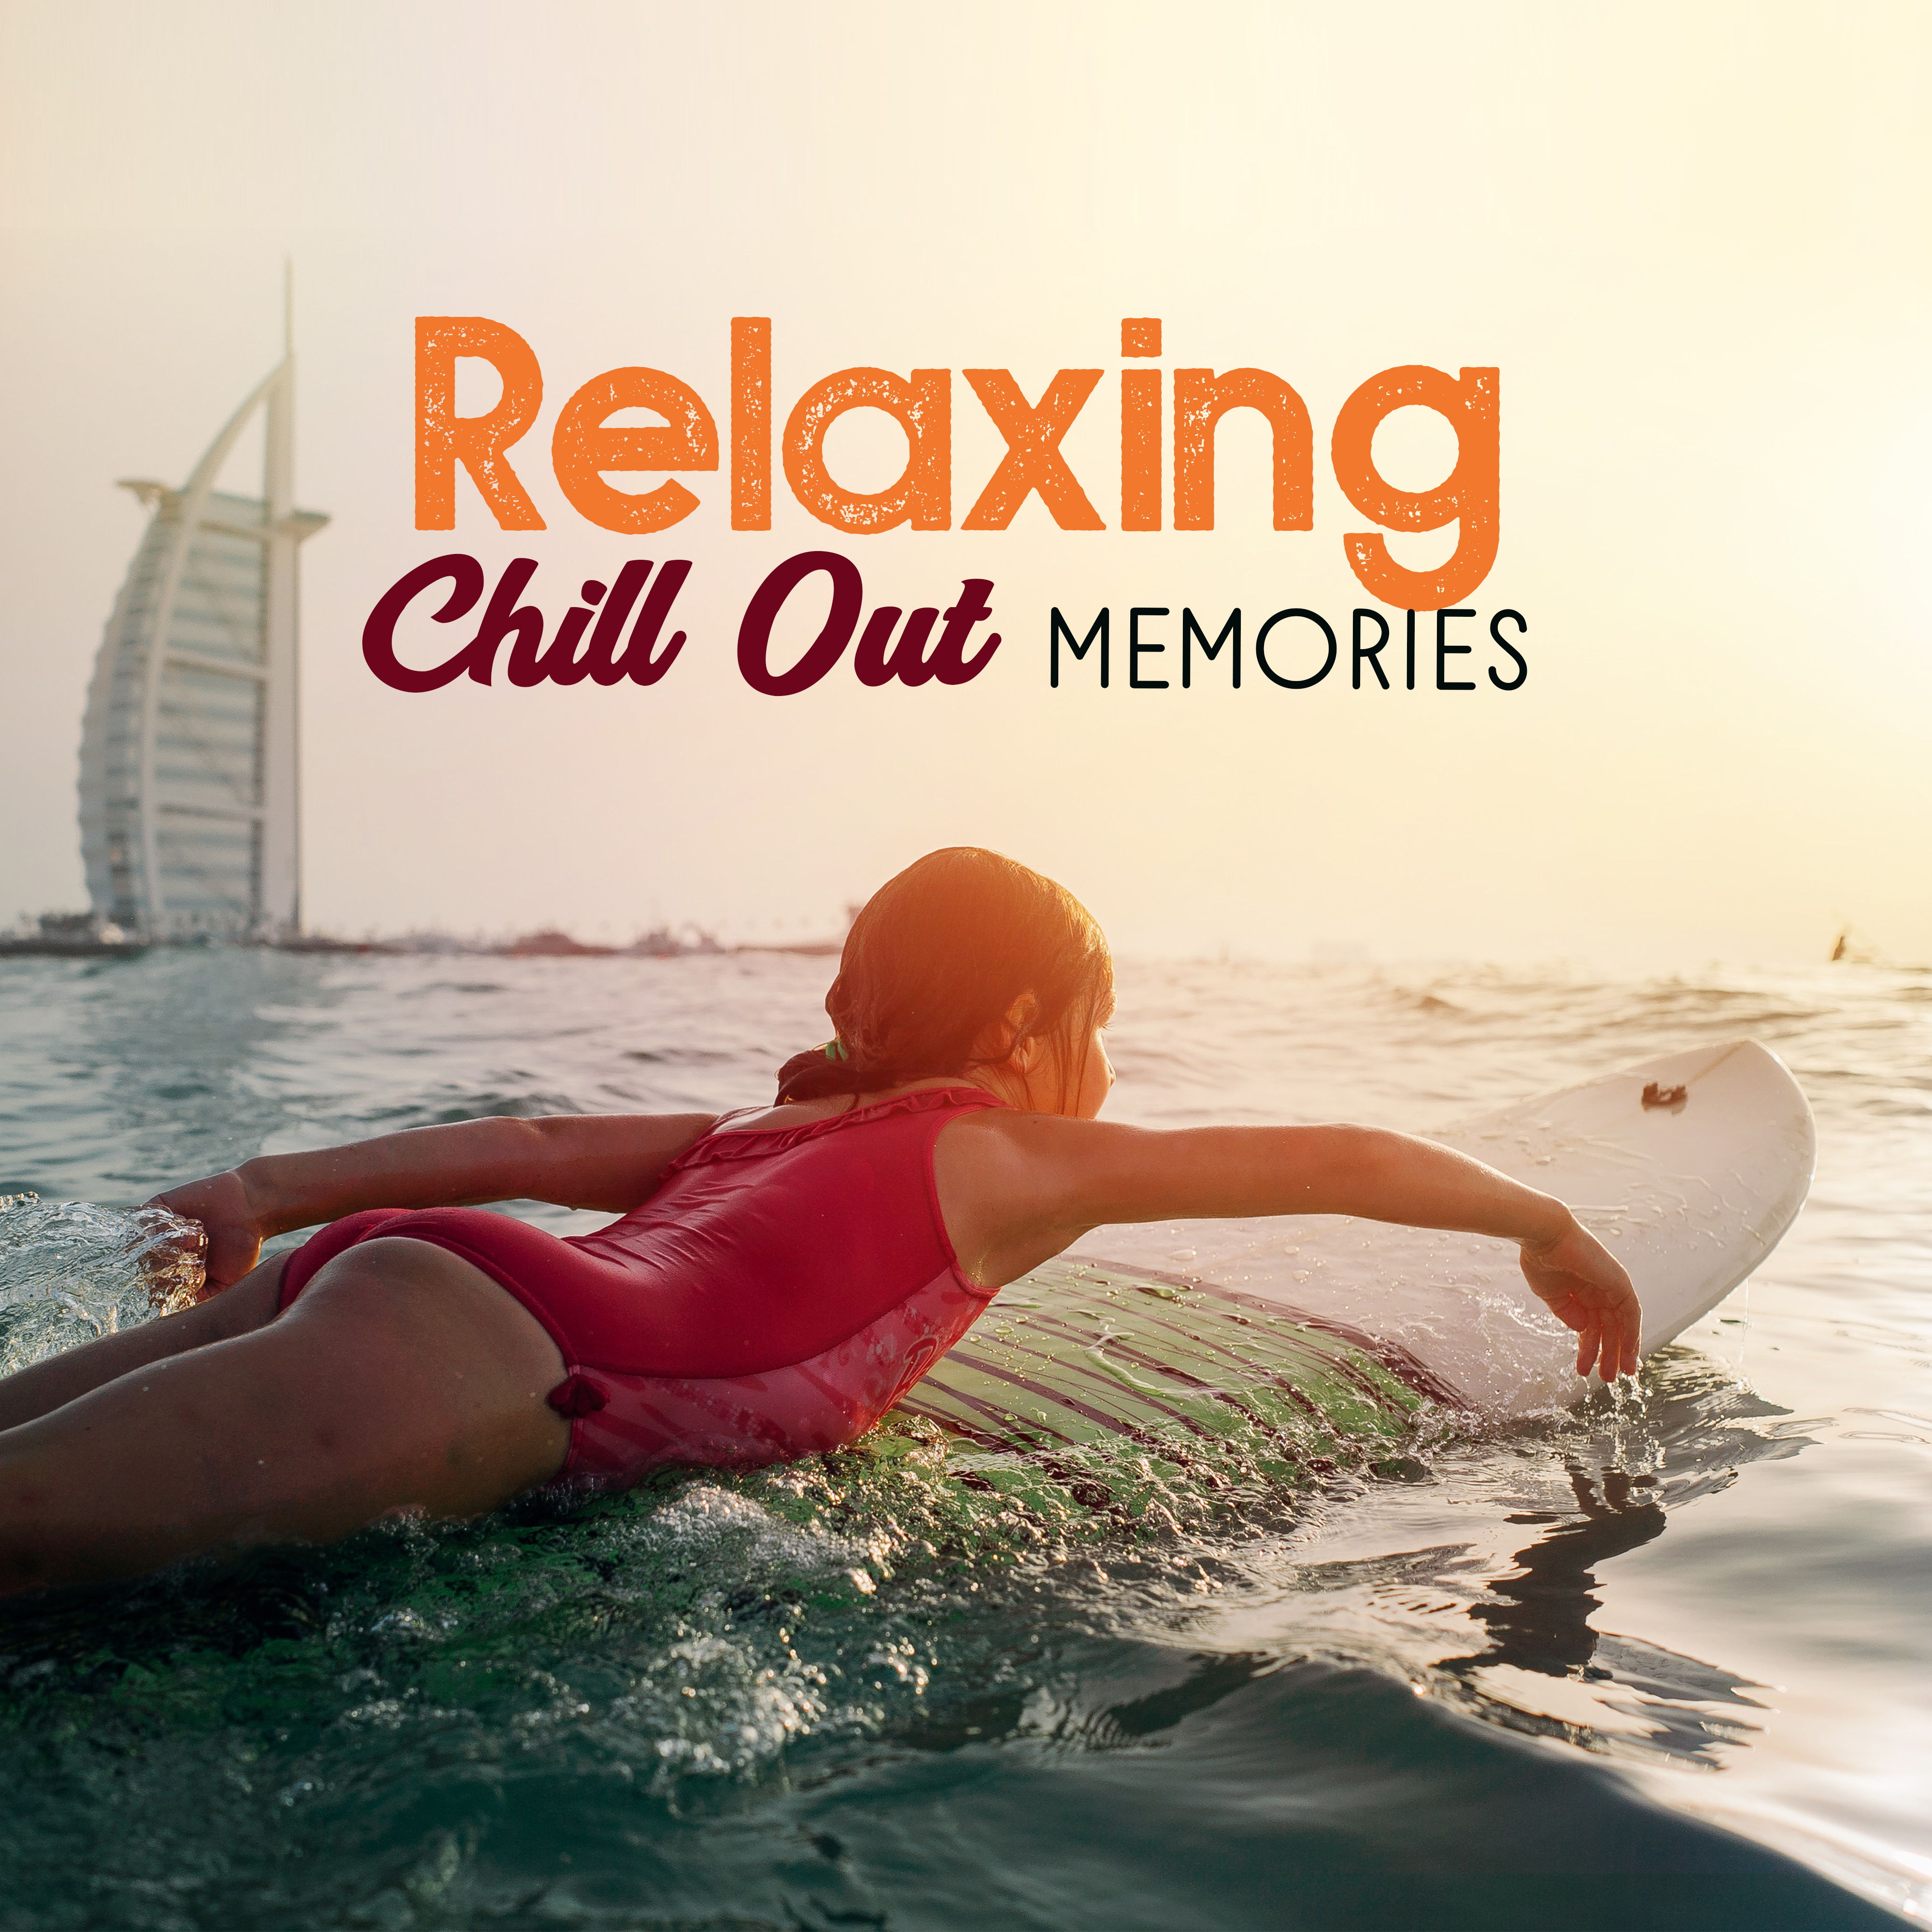 Relaxing Chill Out Memories – Summer Songs, Chill Out Music, Stress Relief, Peaceful Sounds